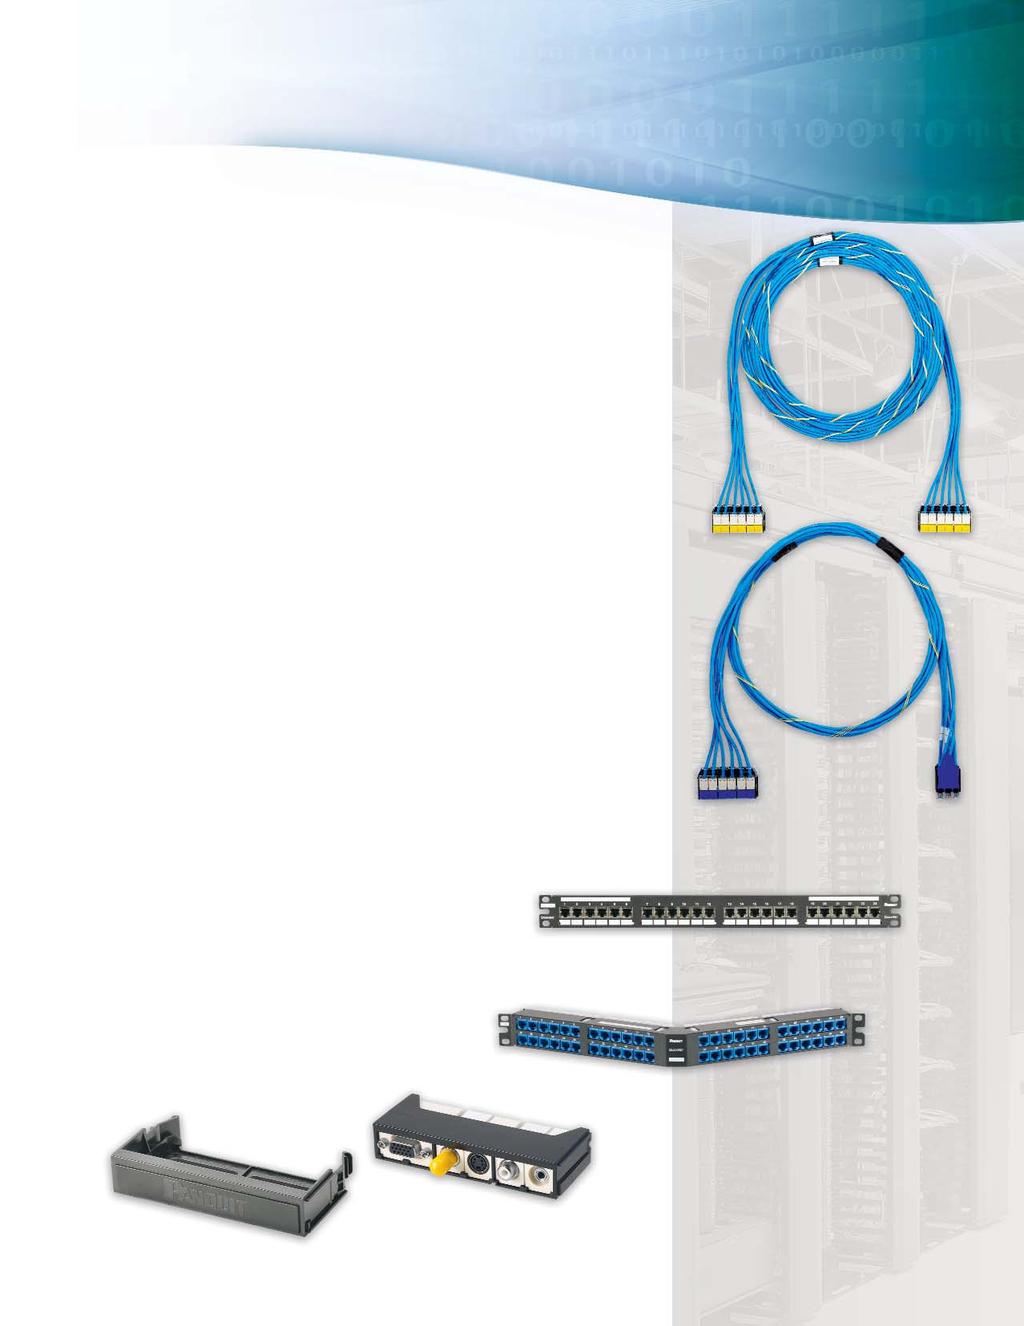 Elements of the System QuickNet Cable Assemblies Offer UTP Category 6 Cabling and UTP/STP Category 6A Cabling (plenum, riser, LSZH, and CM fire ratings) Pre-bundled with six cables for easy